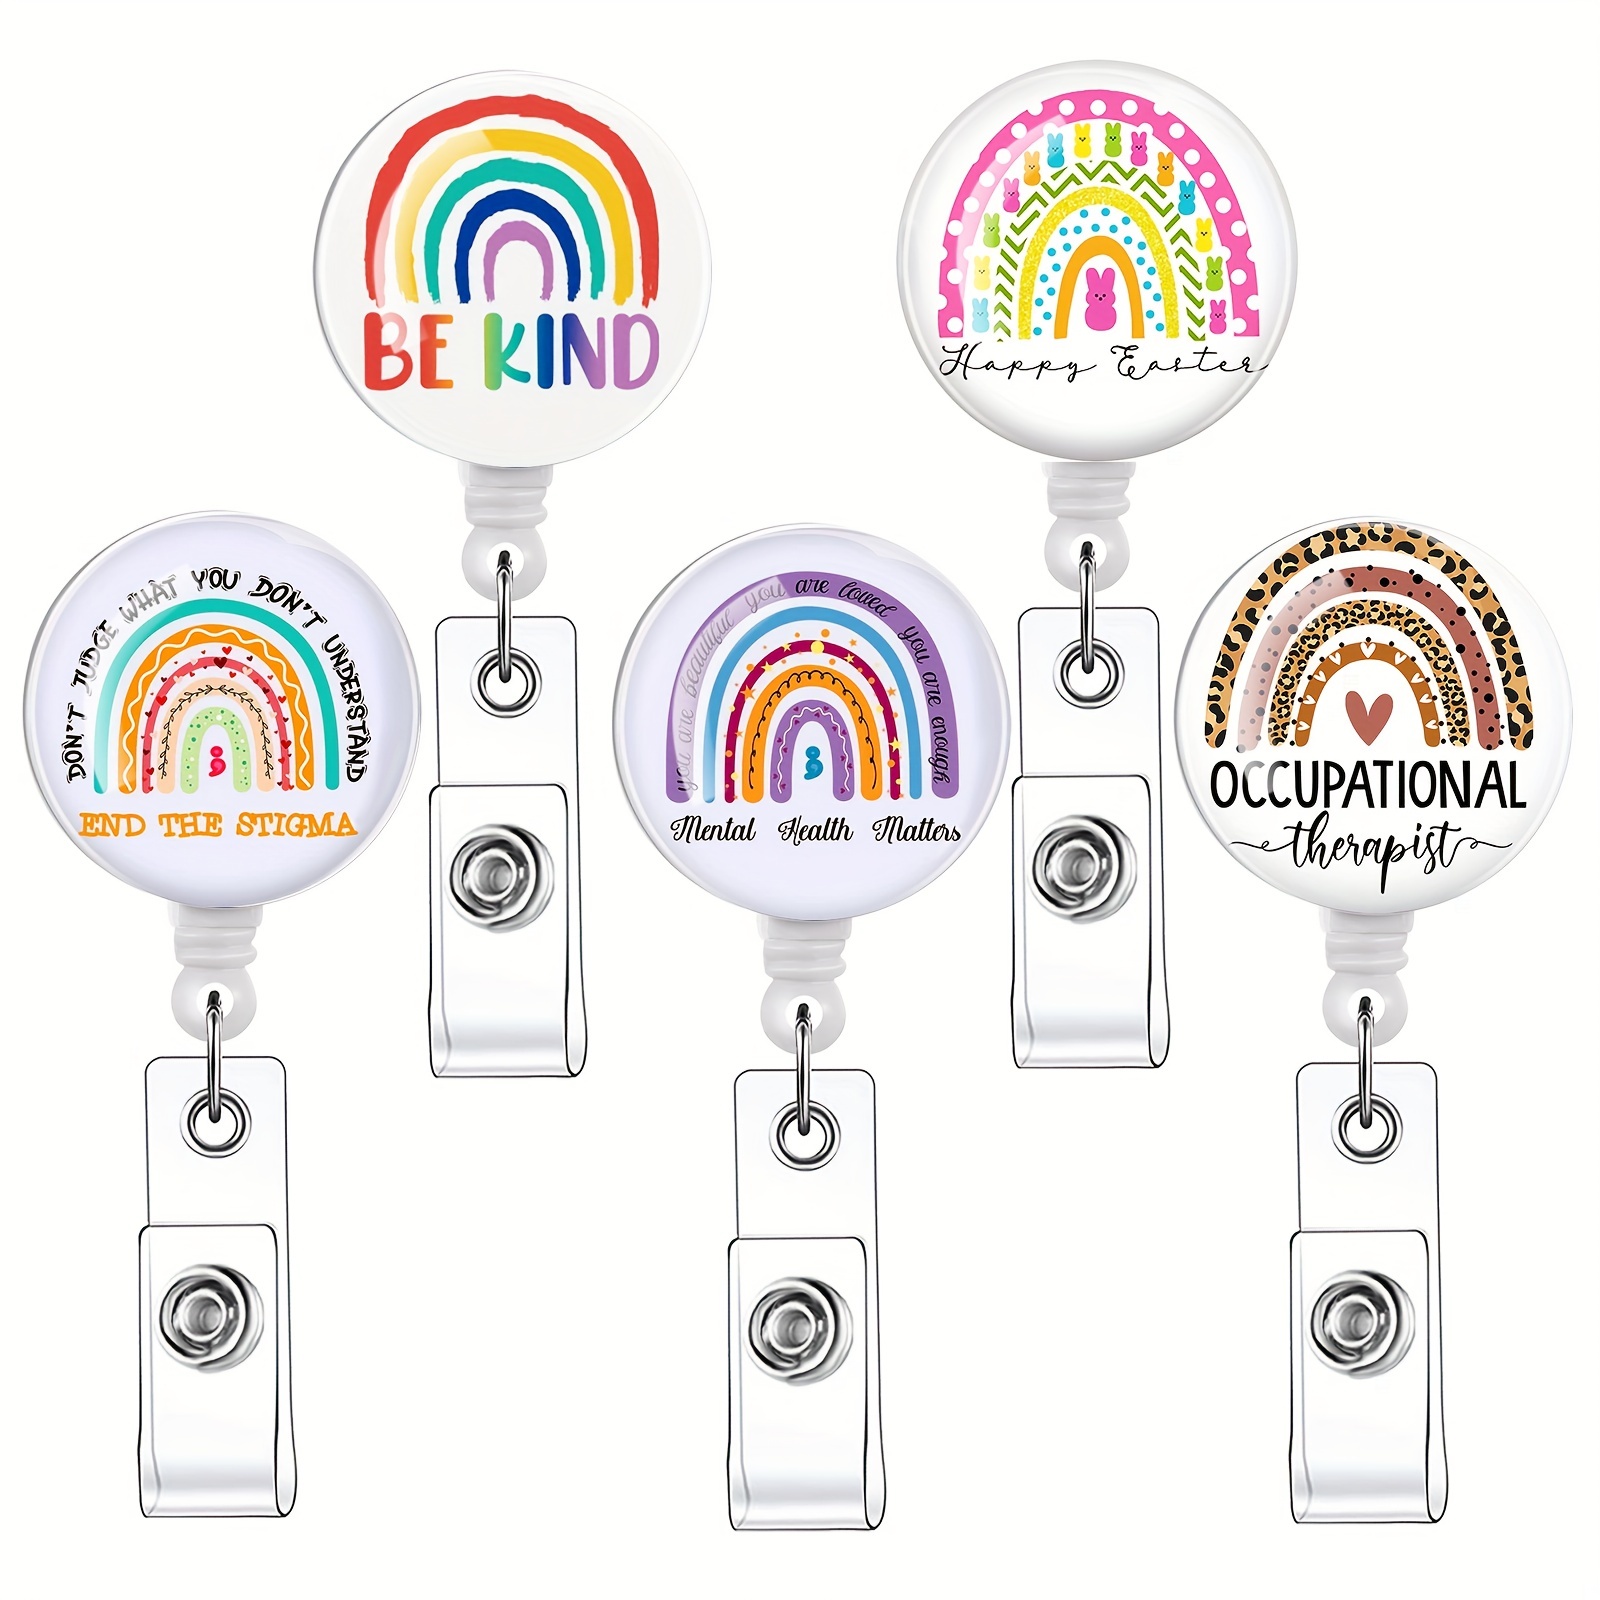  OT Occupational Therapy Therapist Badge Reels Holder